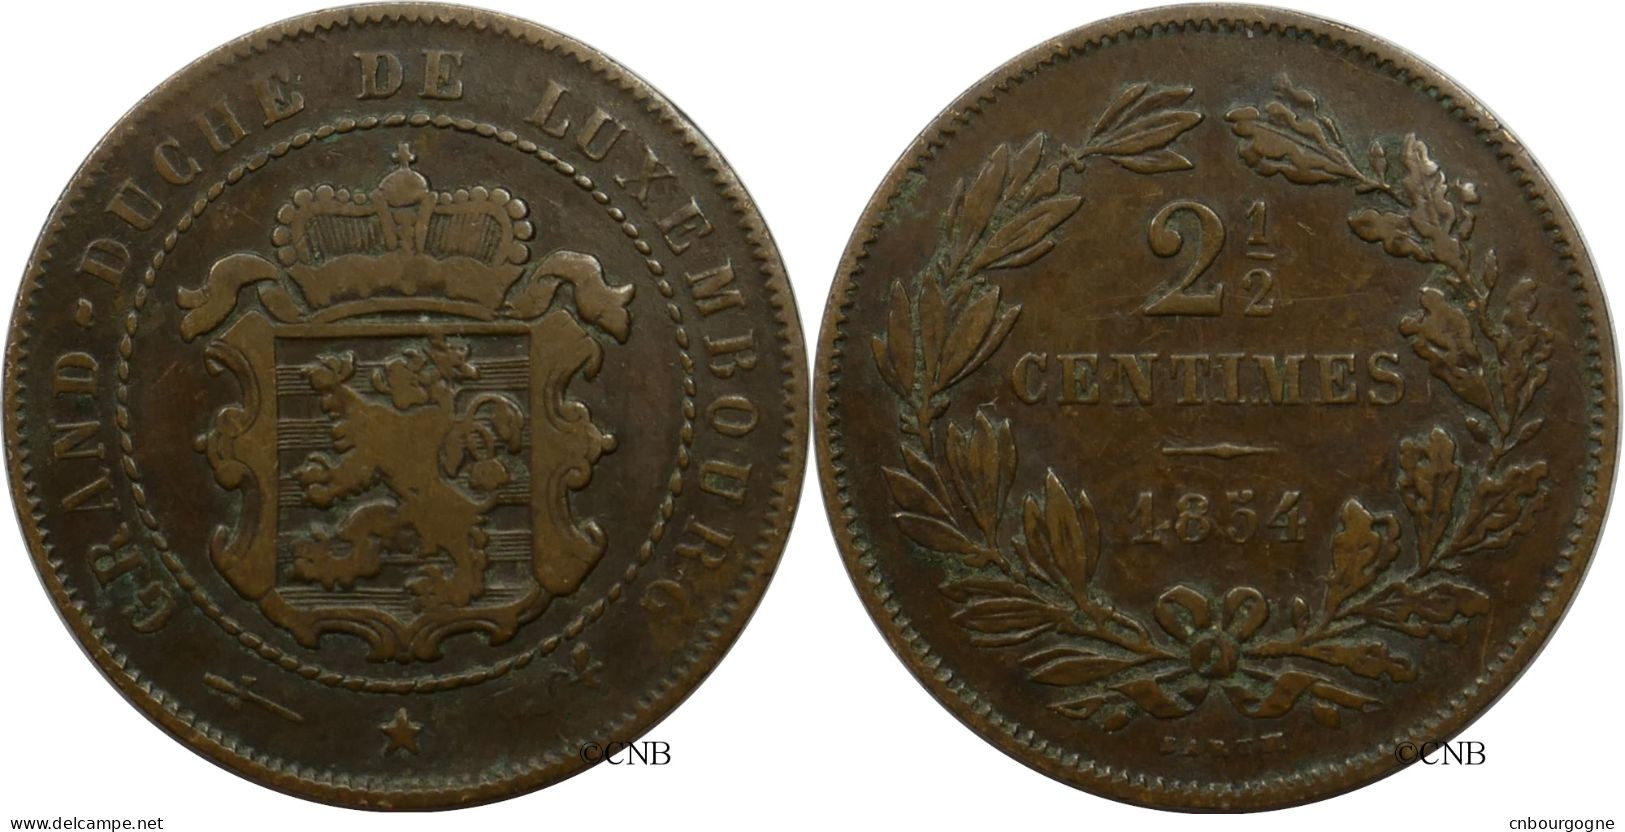 Luxembourg - Grand-Duché - Willem III - 2 1/2 Centimes 1854 - TB+/VF35 - Mon5820 - Luxembourg